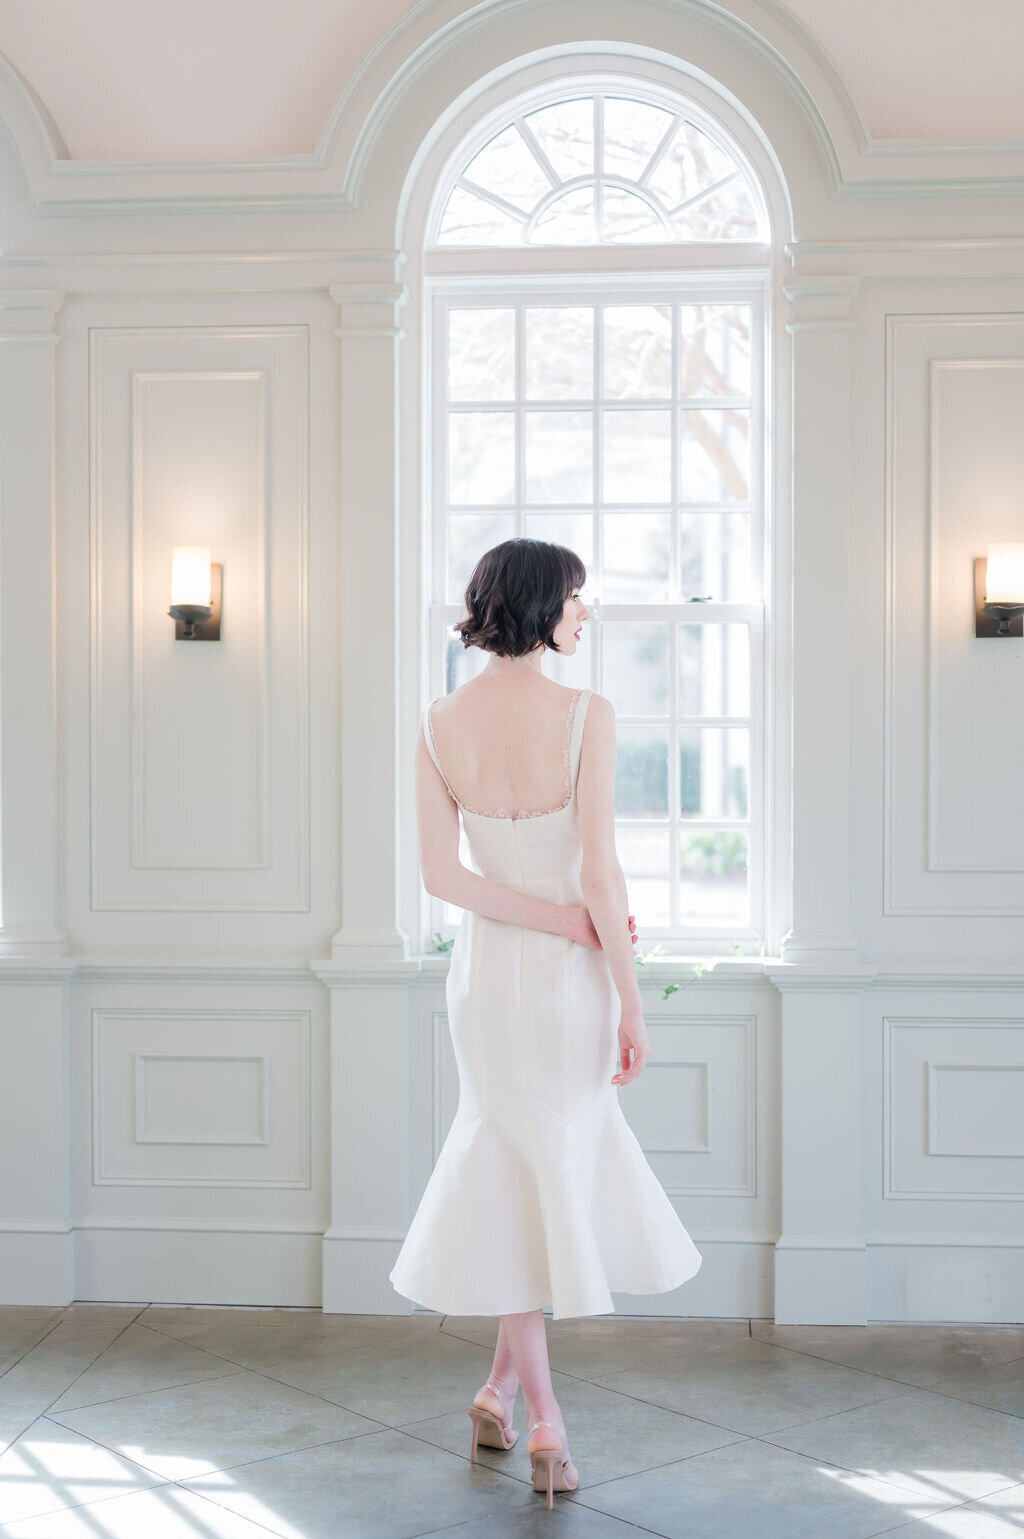 The midi-length fit-and-flare silhouette of the Lana style is a sassy yet sophisticated vibe for a little white wedding dress.